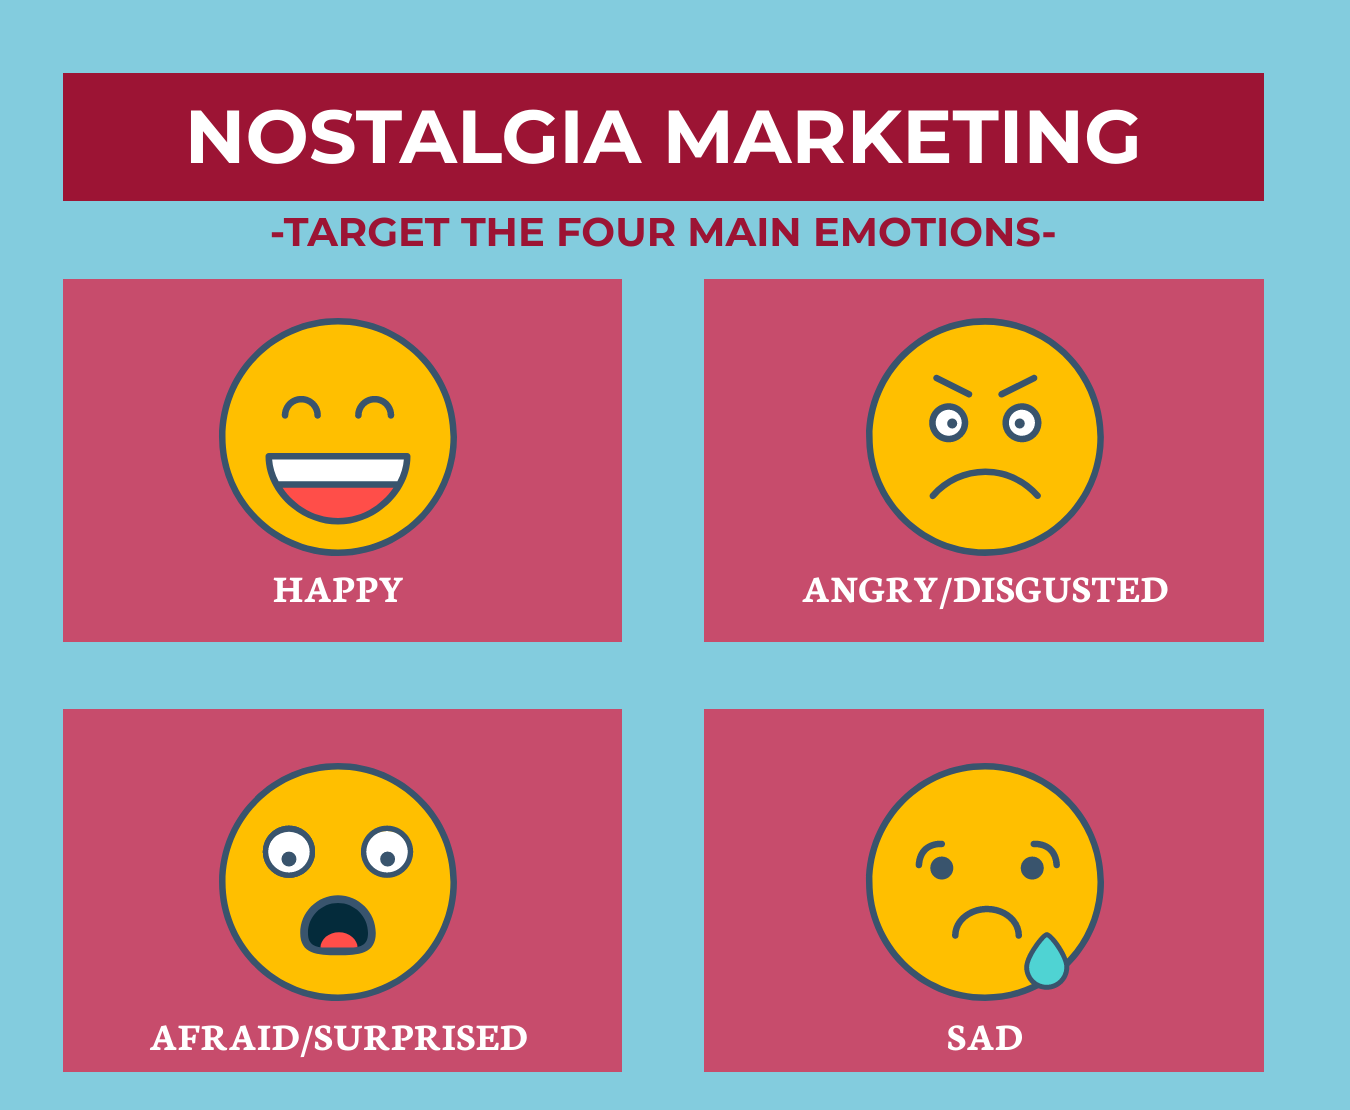 Nostalgia Marketing Content Strategy - target the hour main emotions